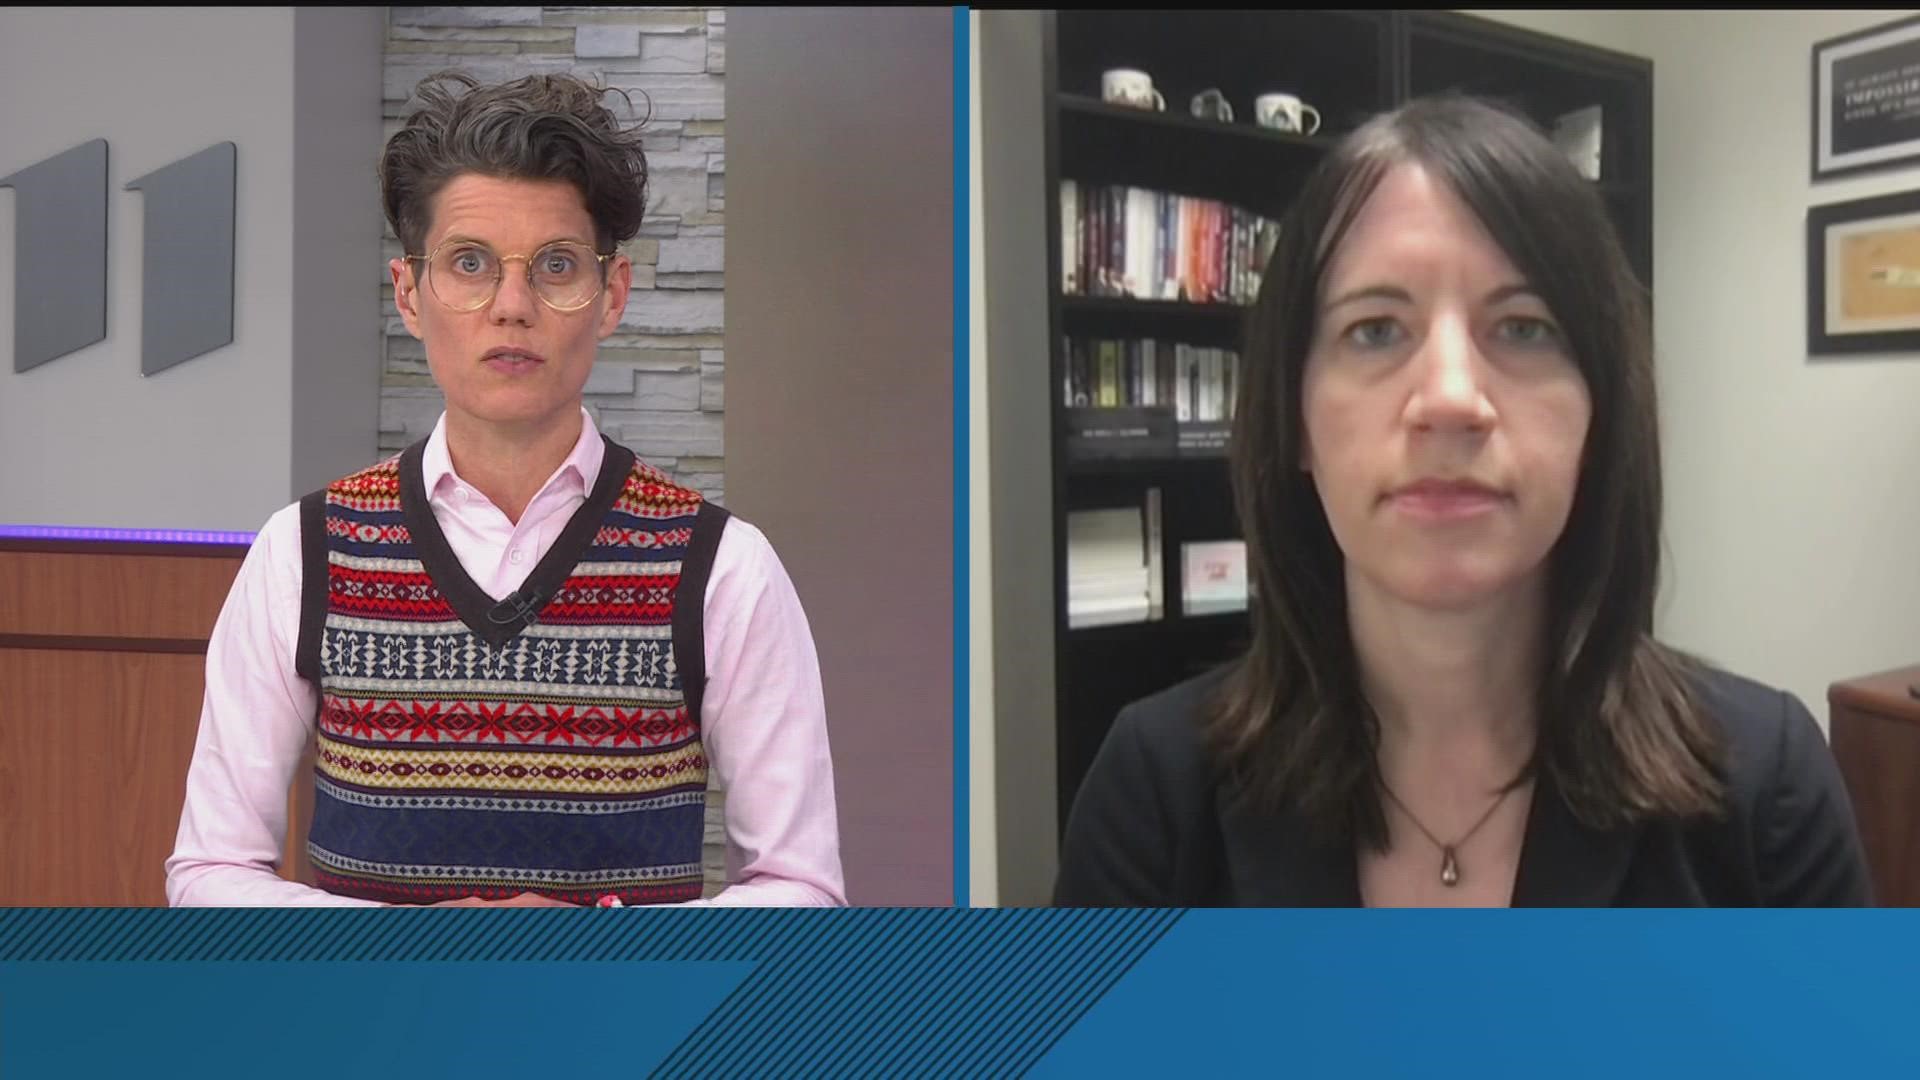 University of St. Thomas Professor Rachel Moran focuses her teaching and study on police accountability, and joined KARE 11's Jana Shortal on Breaking the News.